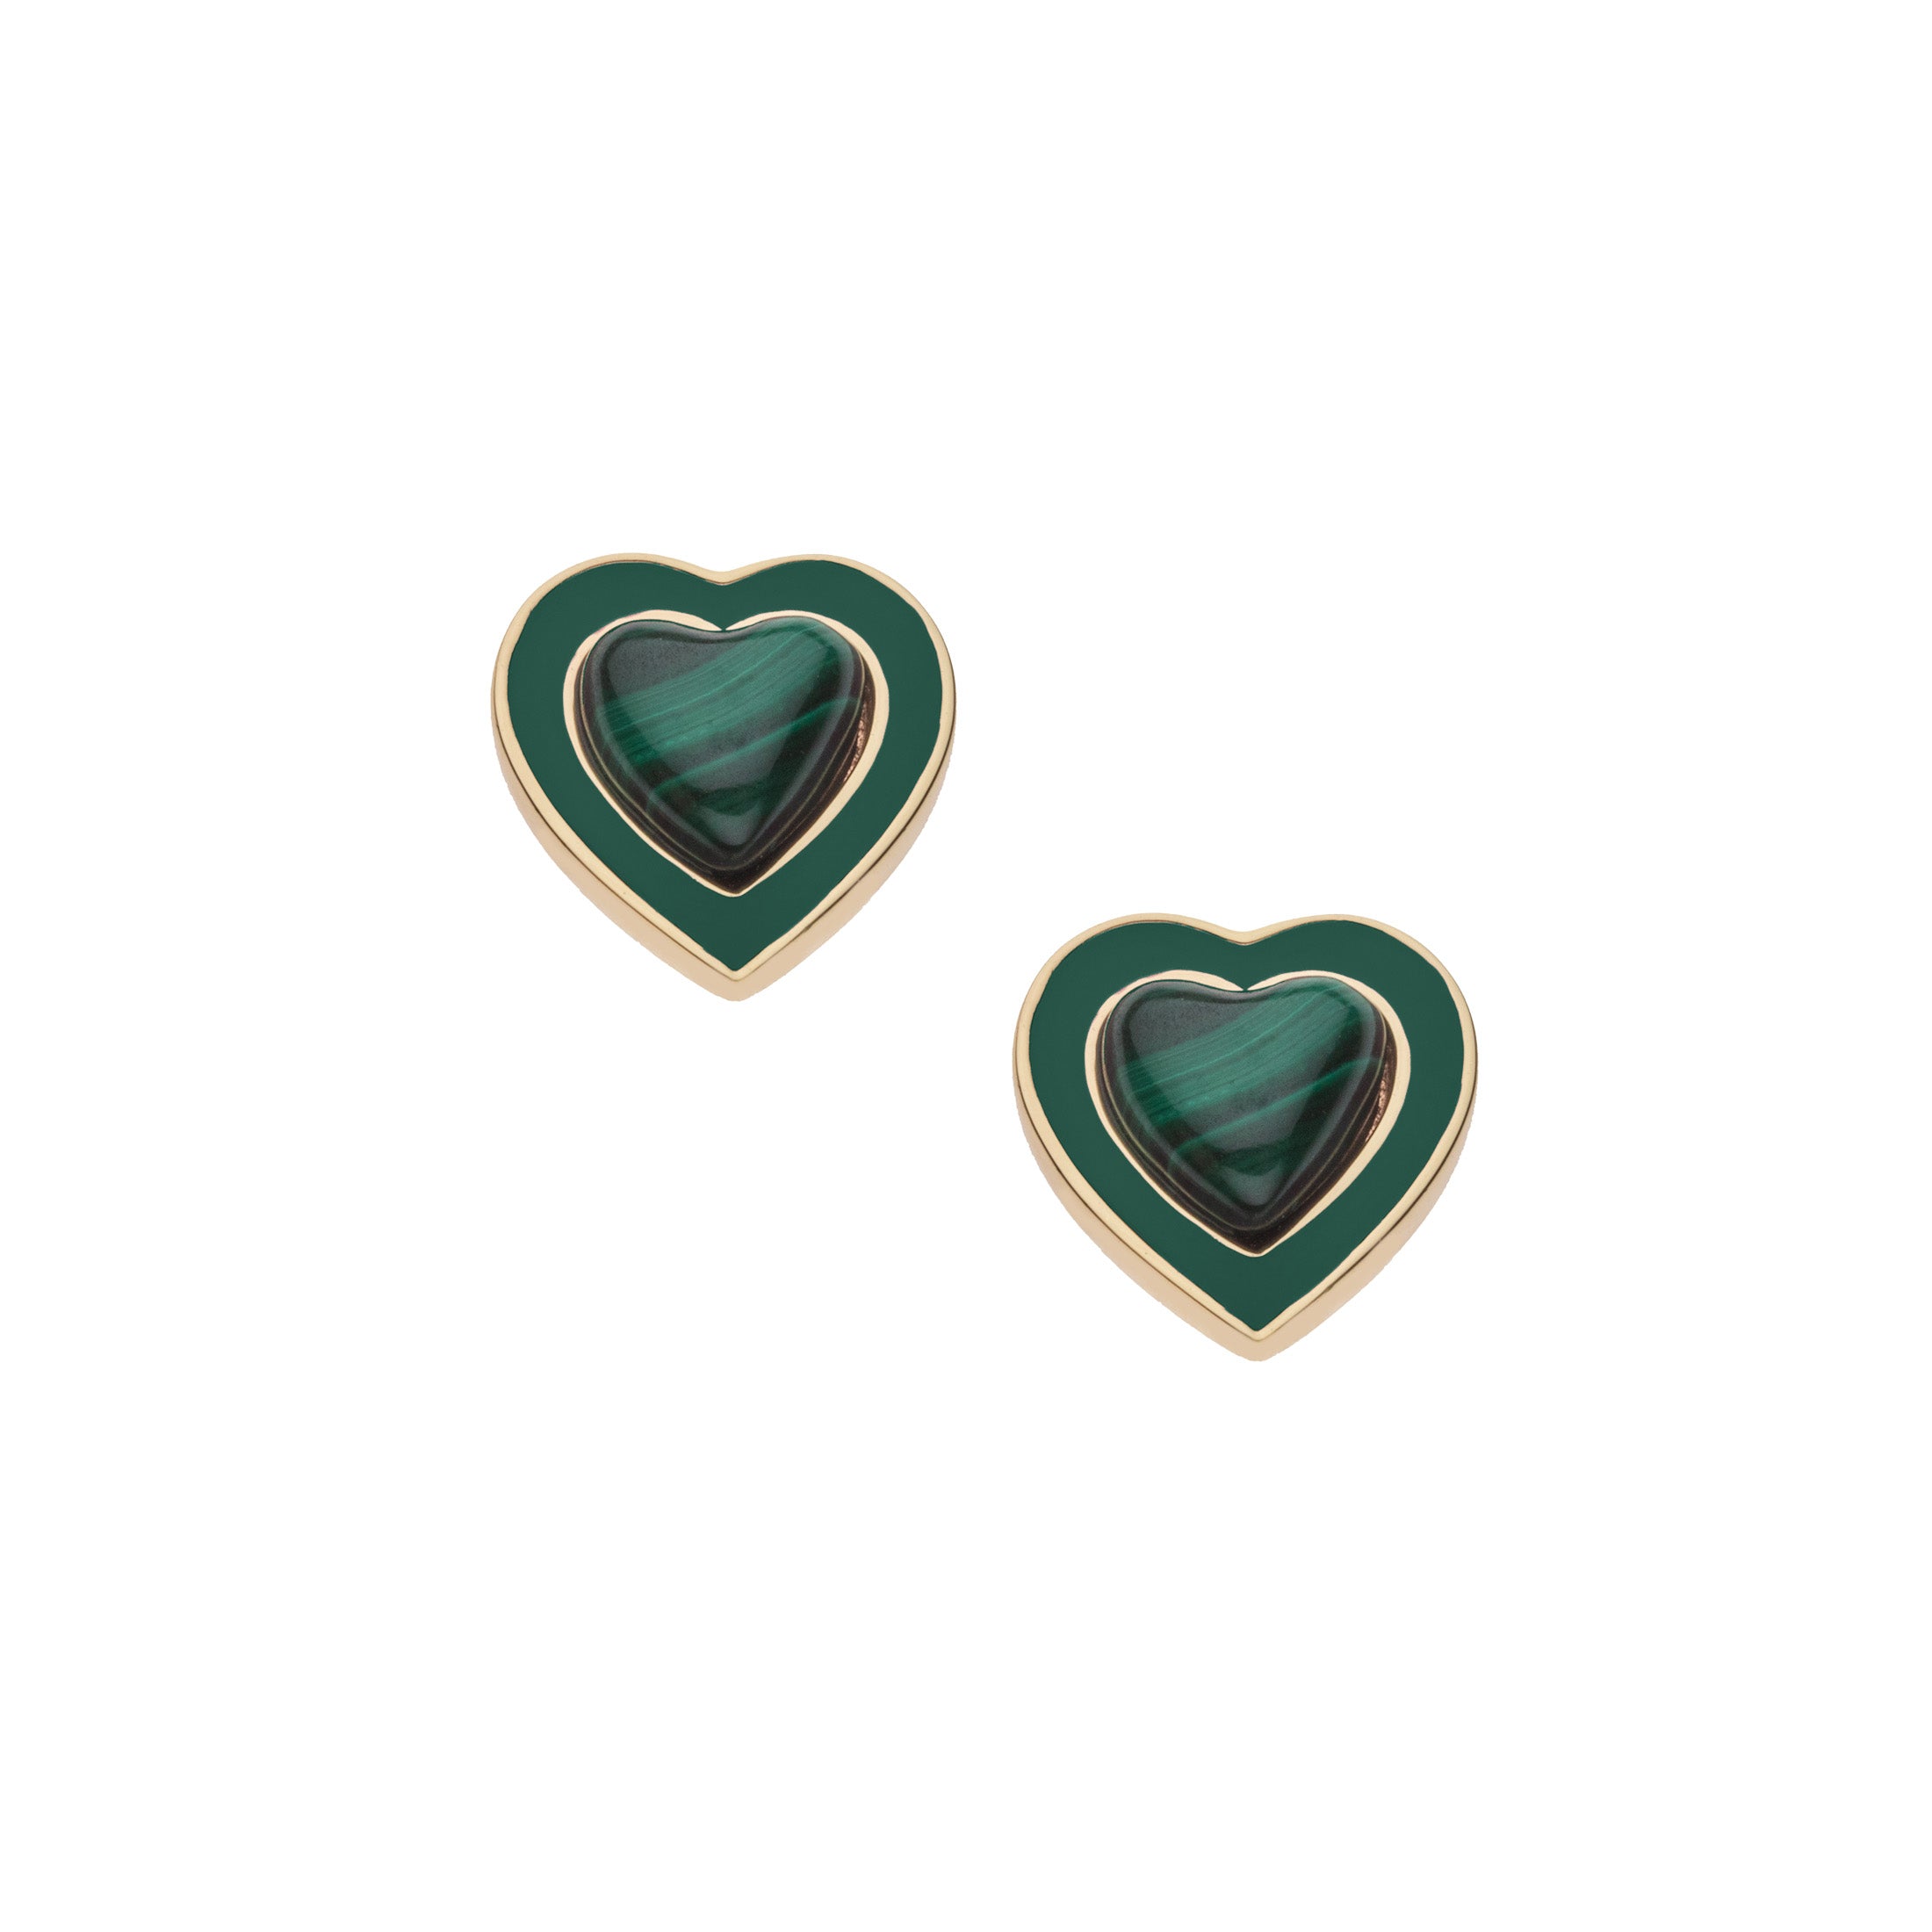 Buy Green Emerald Heart Earrings, 925 Sterling Silver Pave Diamond Earrings,  Emerald Earrings, Wedding Jewelry, Valentine's Day Gift, Gift Ideas Online  in India - Etsy